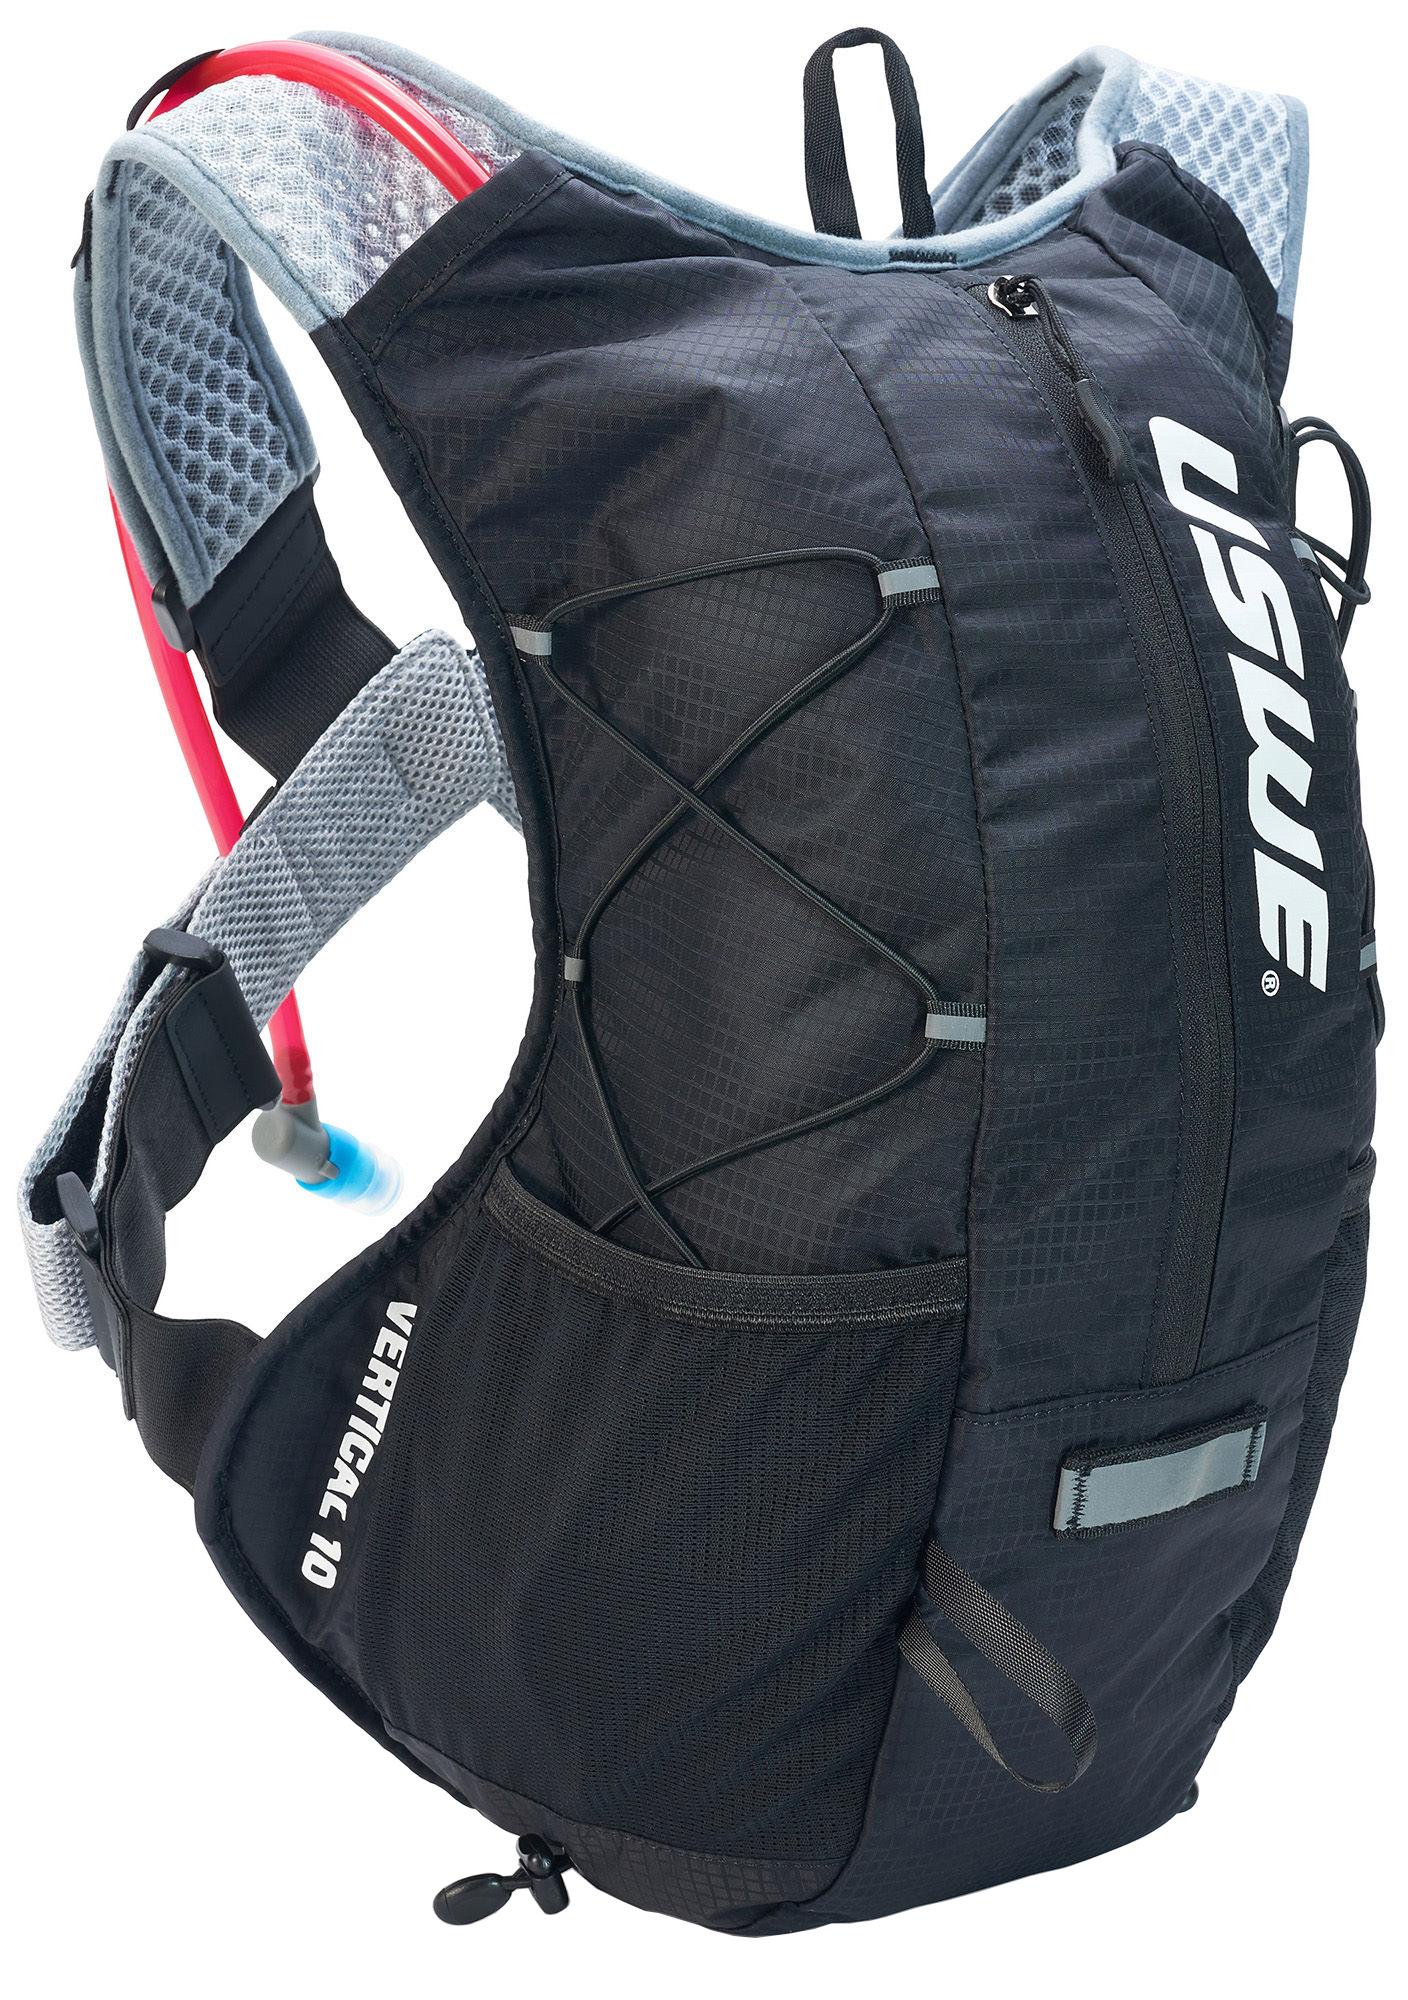 USWE Vertical 10 Hydration Pack | hydration system spare